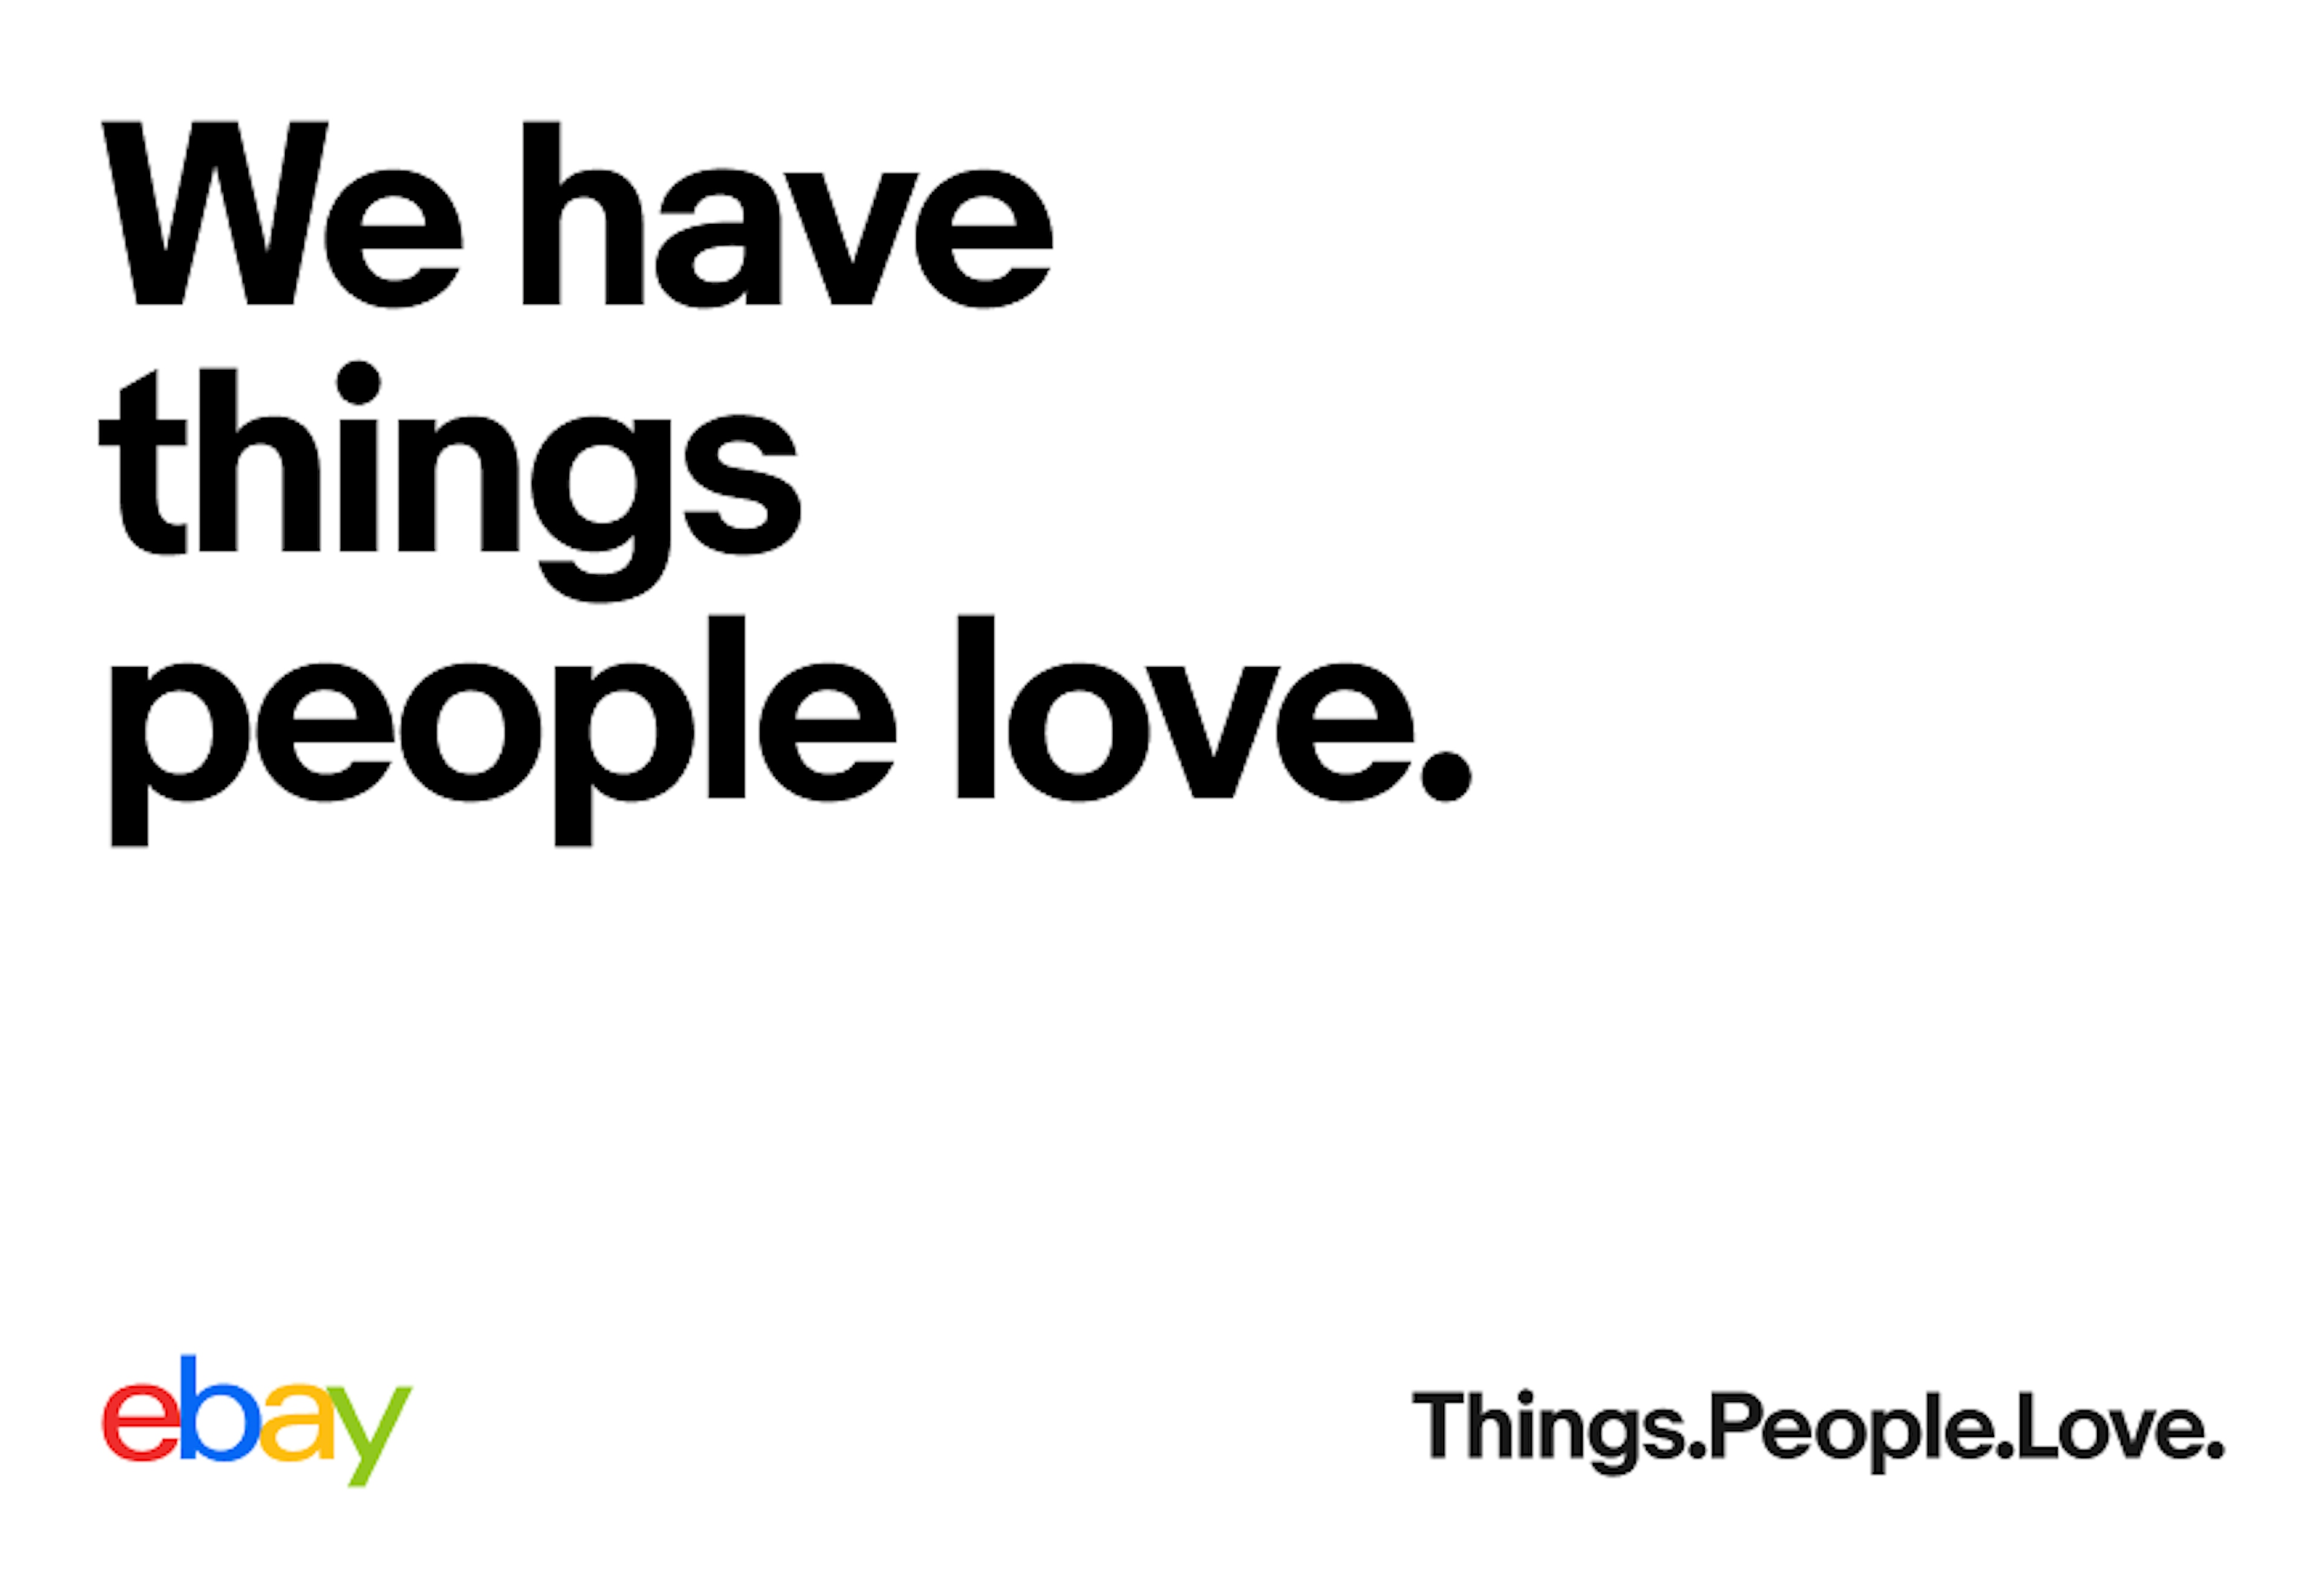 An ad with the headline “We have things people love.” The logo and tagline Things.People.Love. are across the bottom.